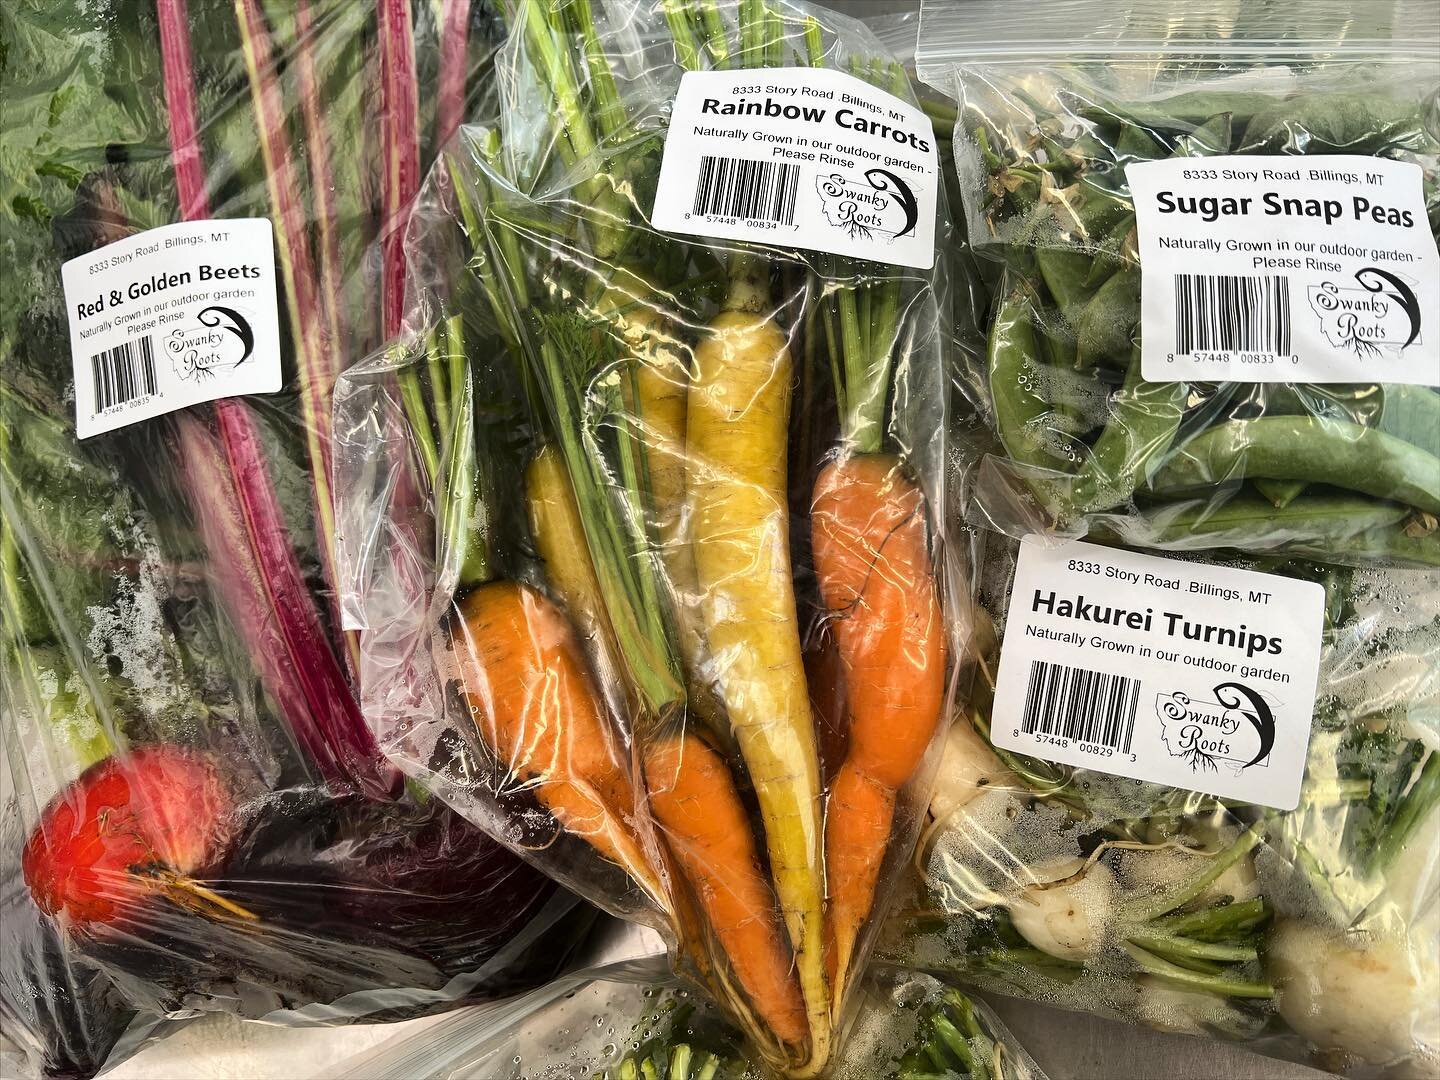 Look at all the veggies you can find at Town &amp; Country Foods in Billings from us! 🥗 And of course lots of our yummy lettuce 🥬 #supportlocal #montanavegetables #montanabusiness